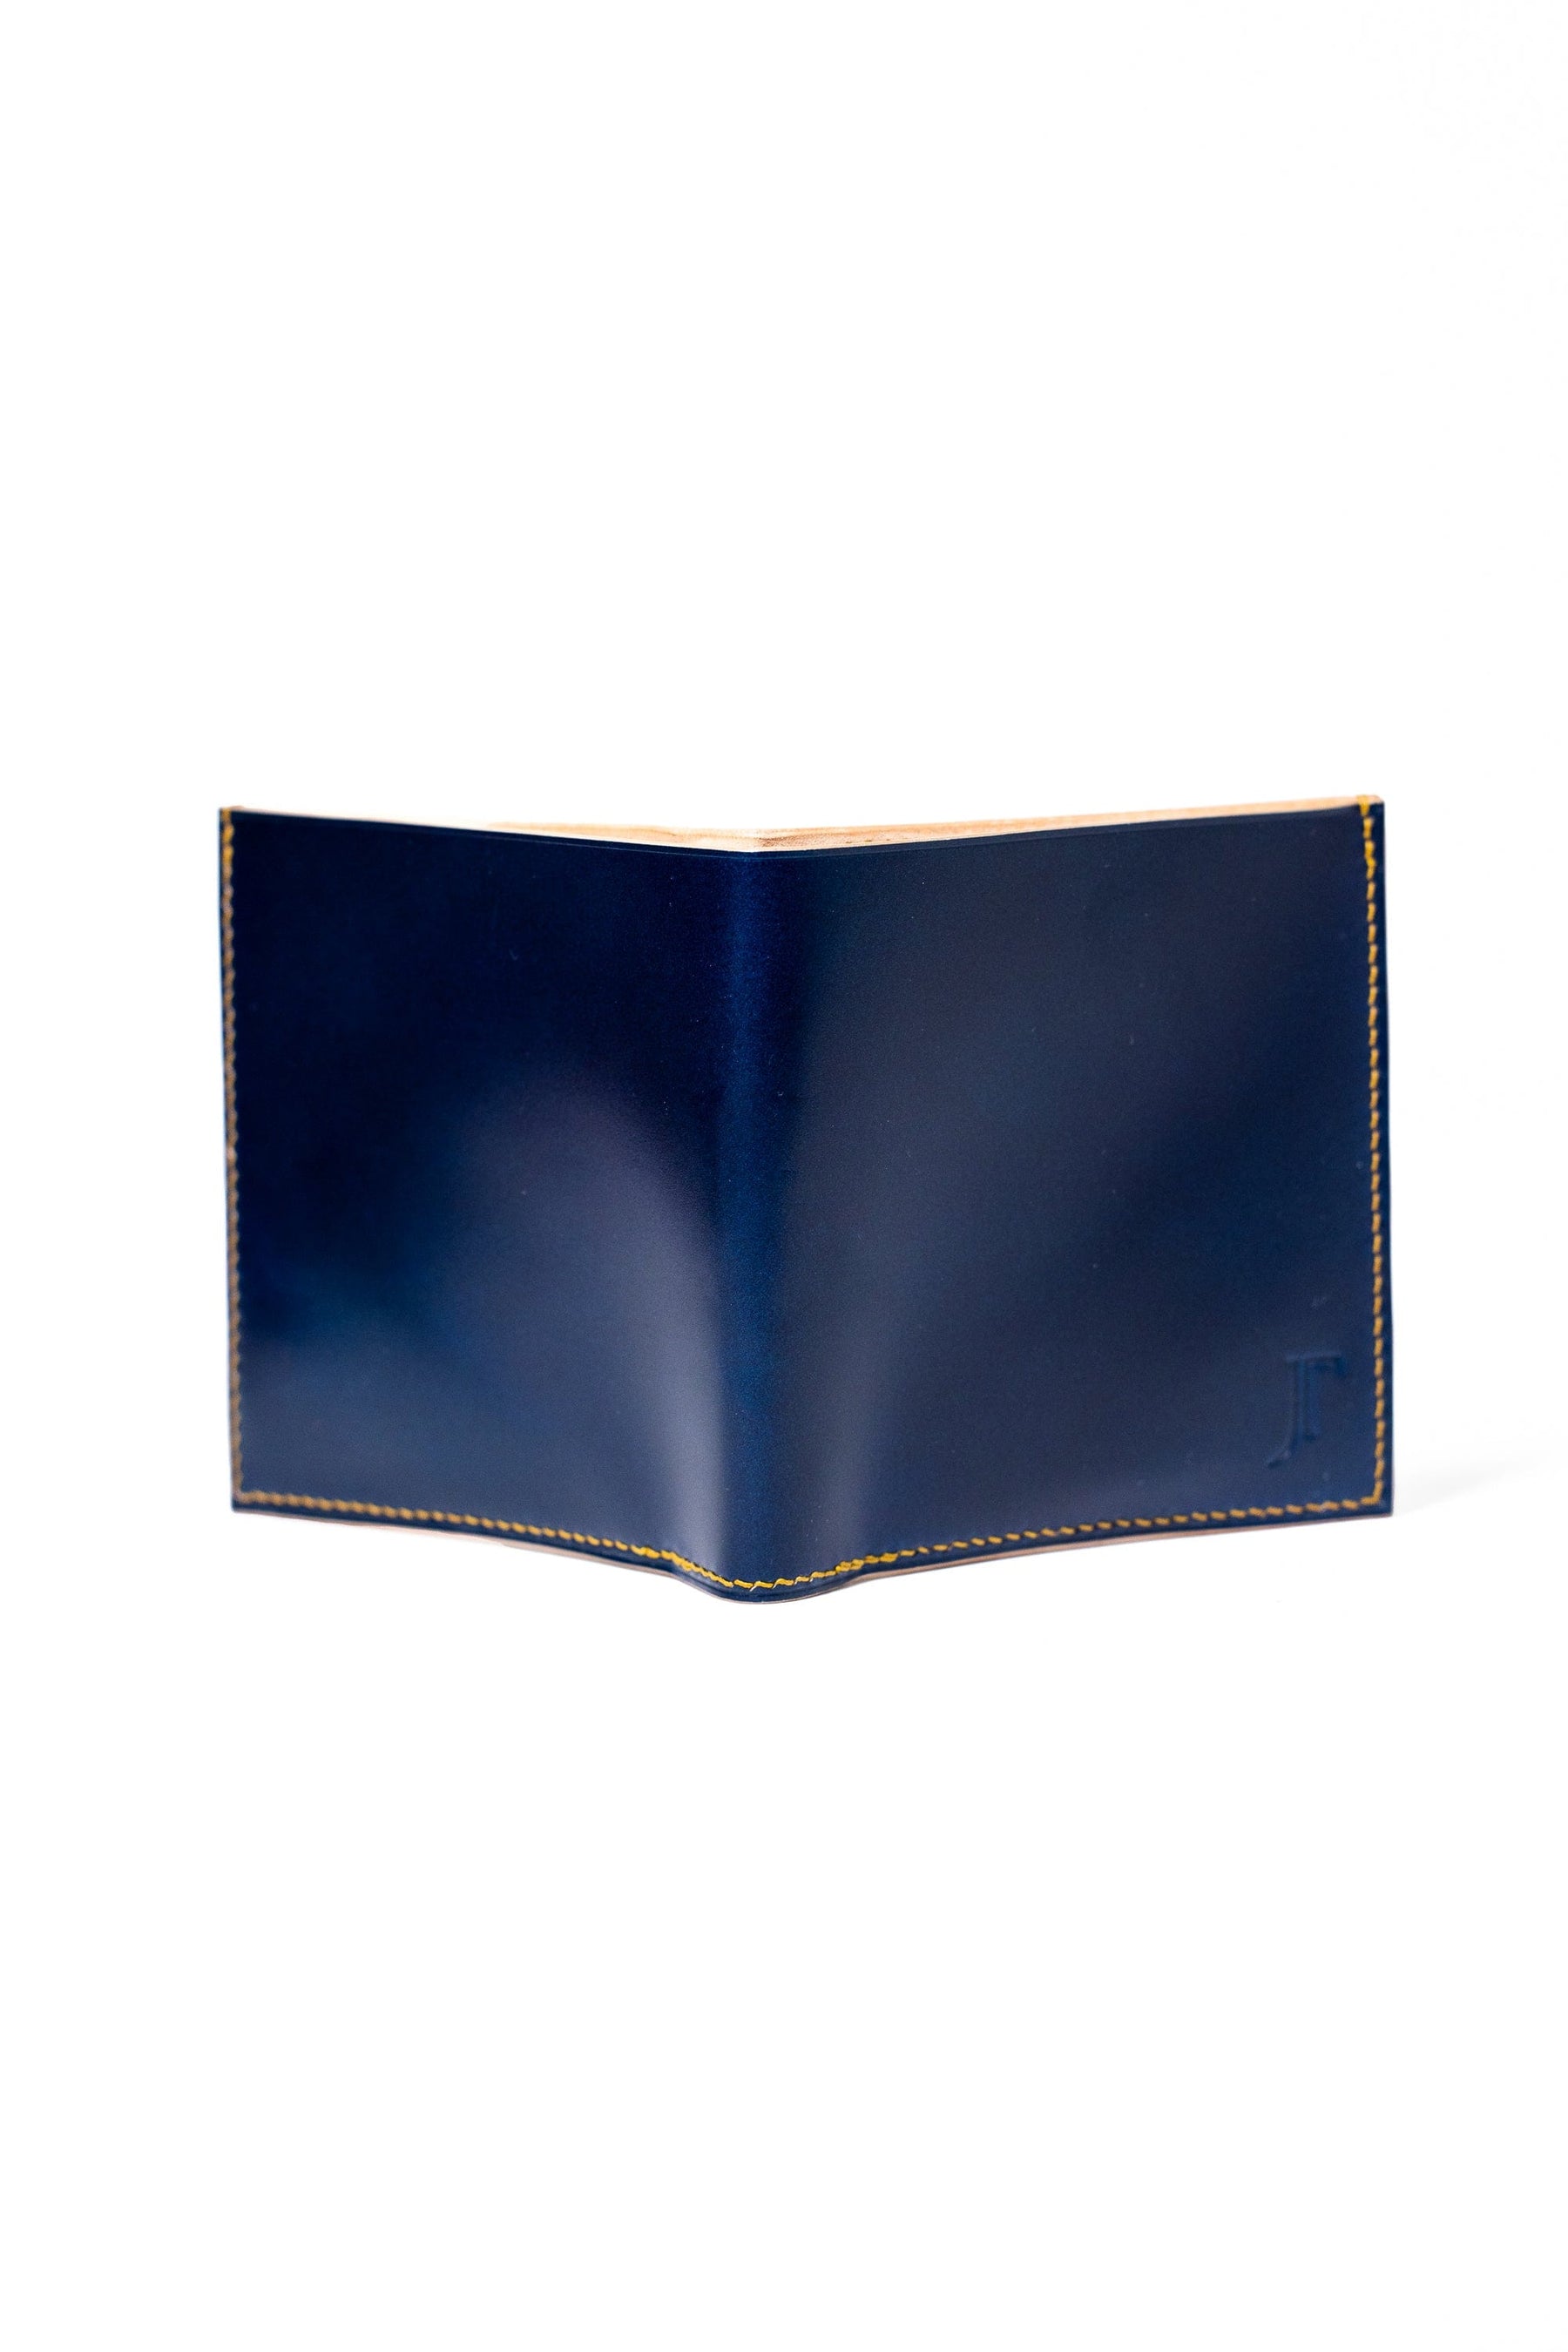 SAMPLE The Tremont Wallet - Deep Blue Shell Cordovan